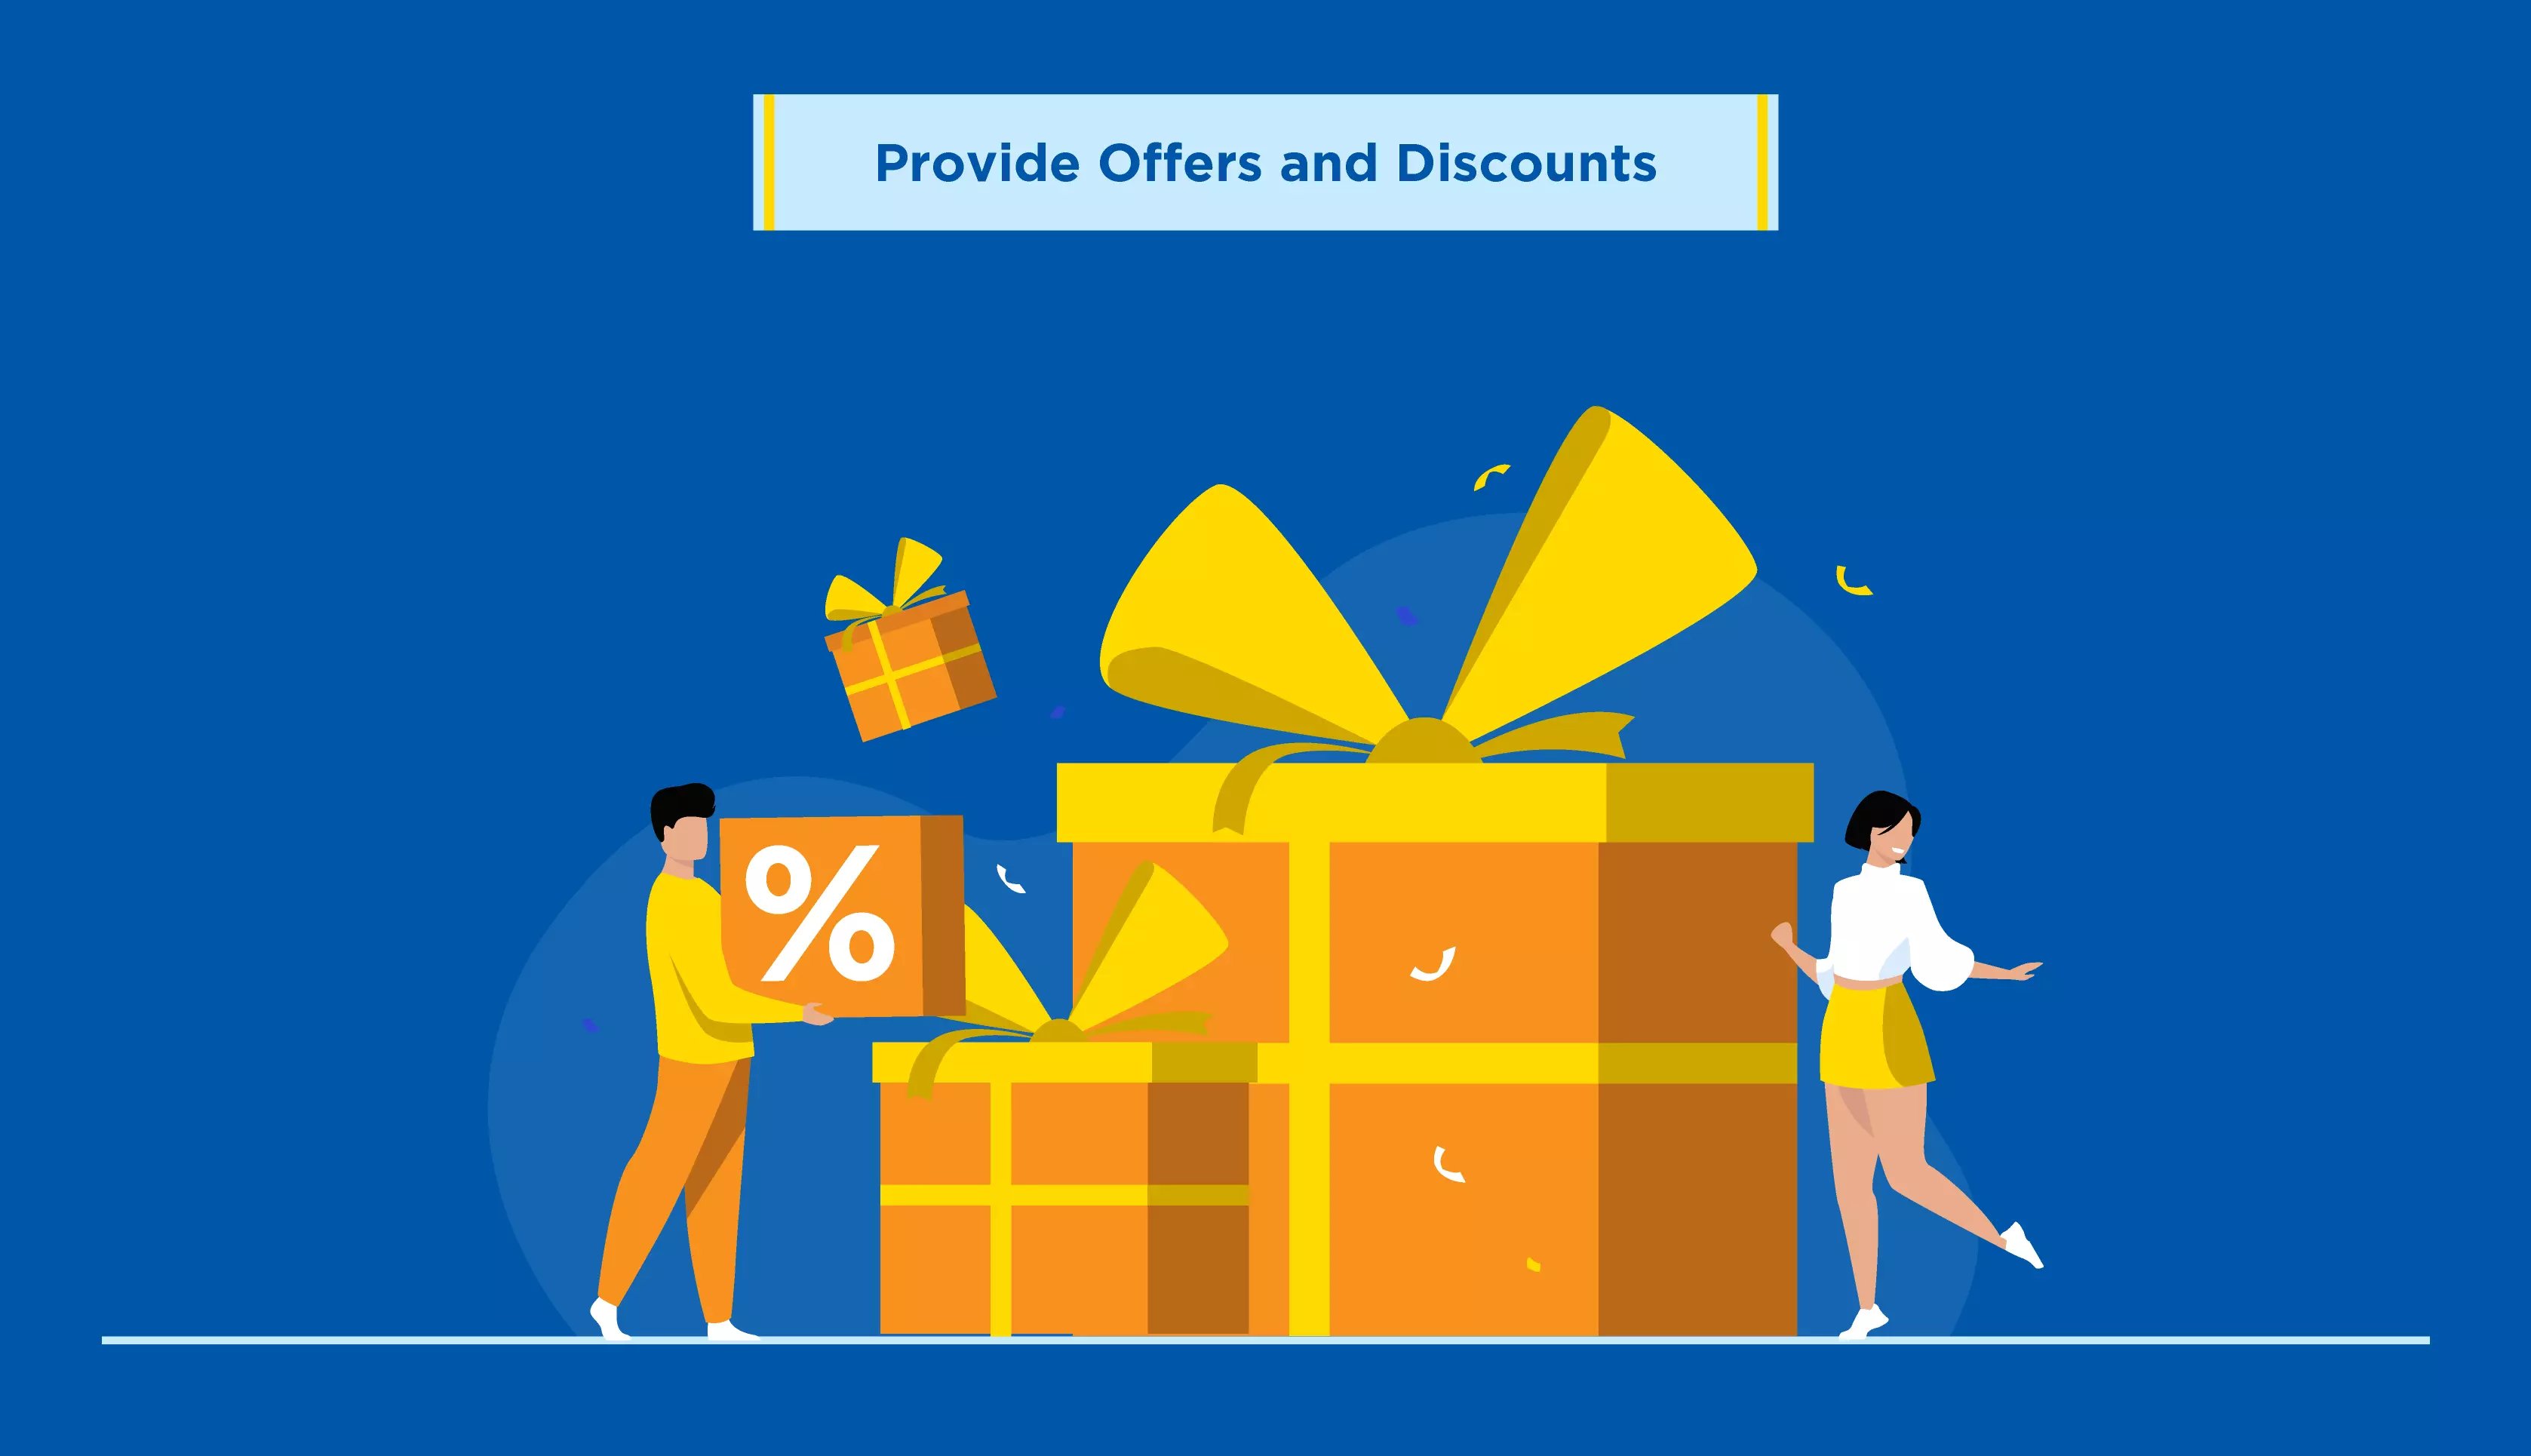 Provide-Offers-and-Discounts-